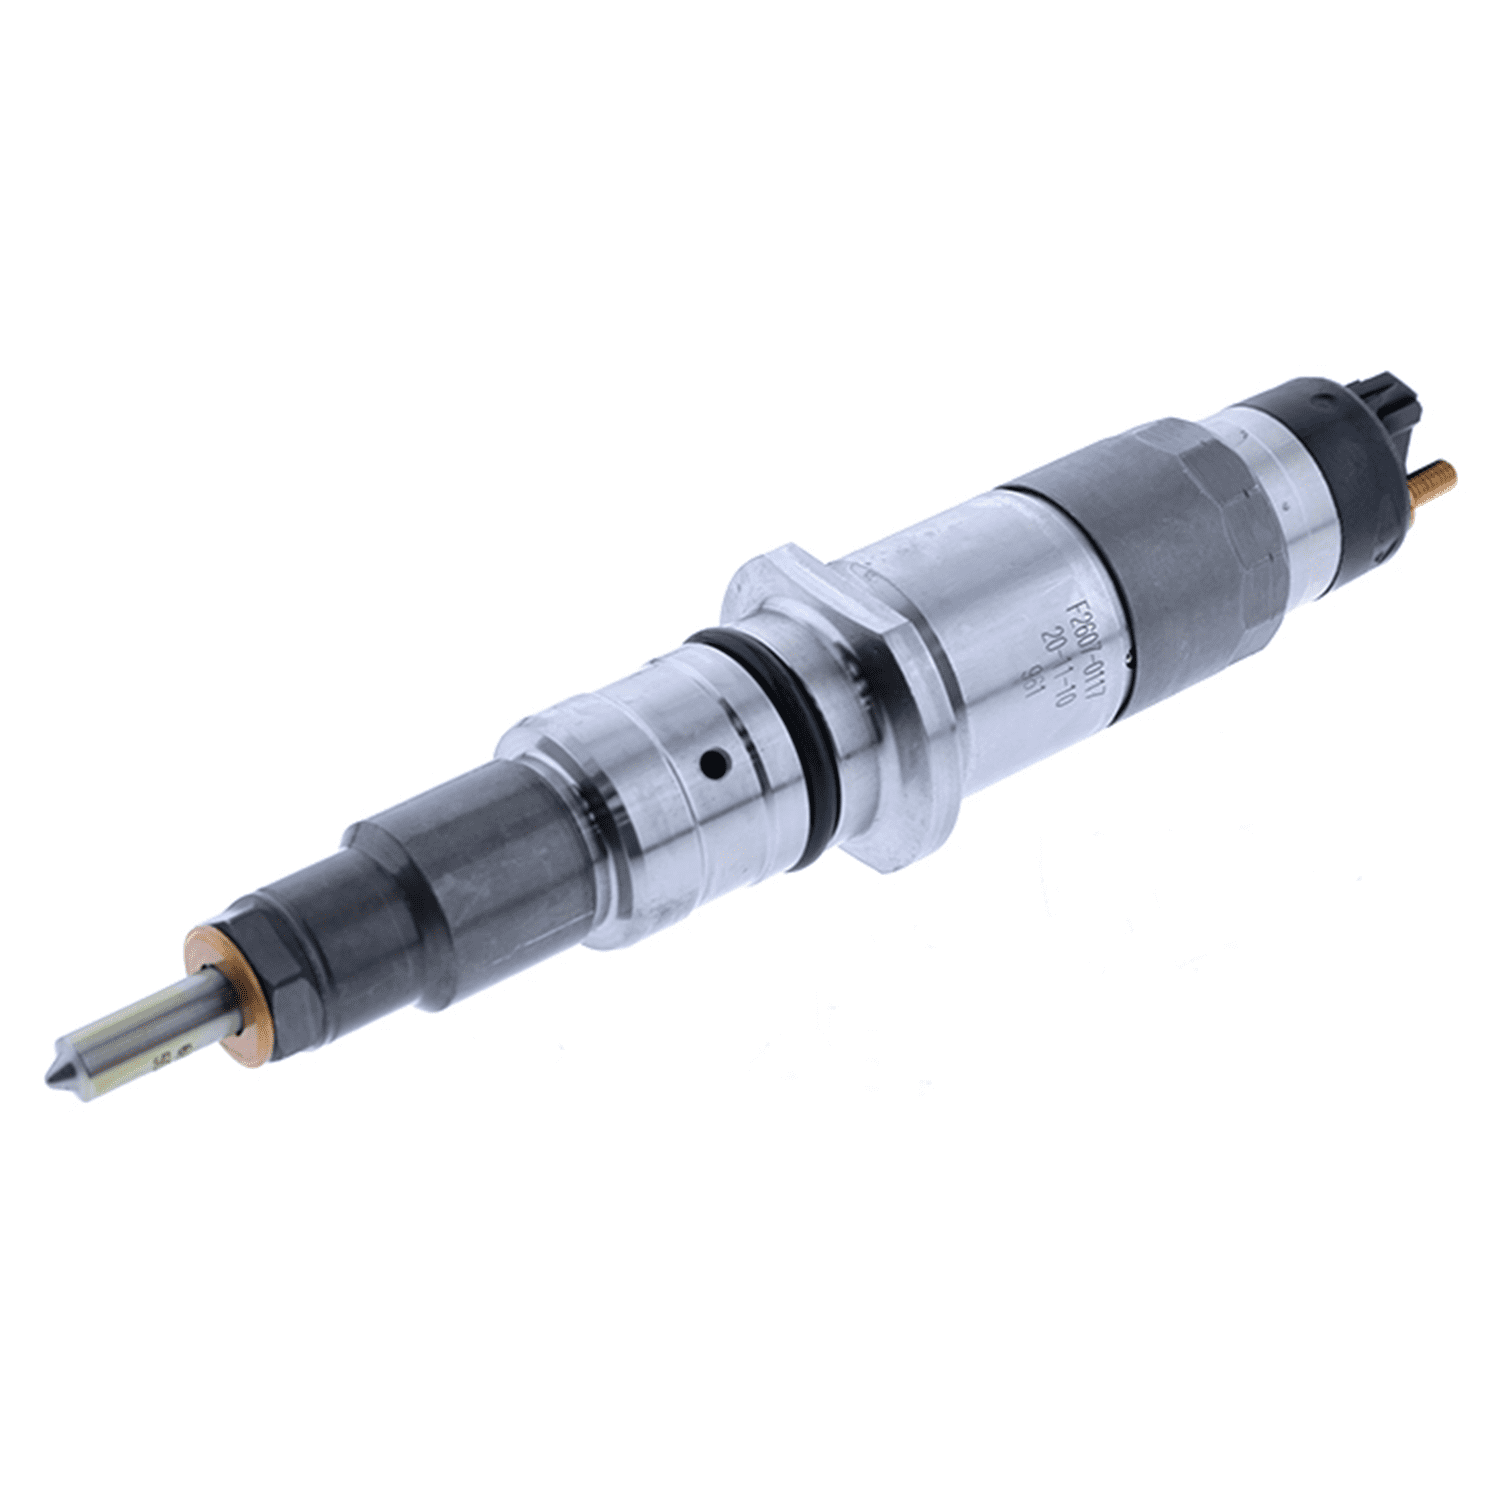 Fuel Injector 6754-11-3011 6754-11-3100 for Komatsu PC200-8 PC200LC-8 with  Engine SAA4D107E SAA6D107E 